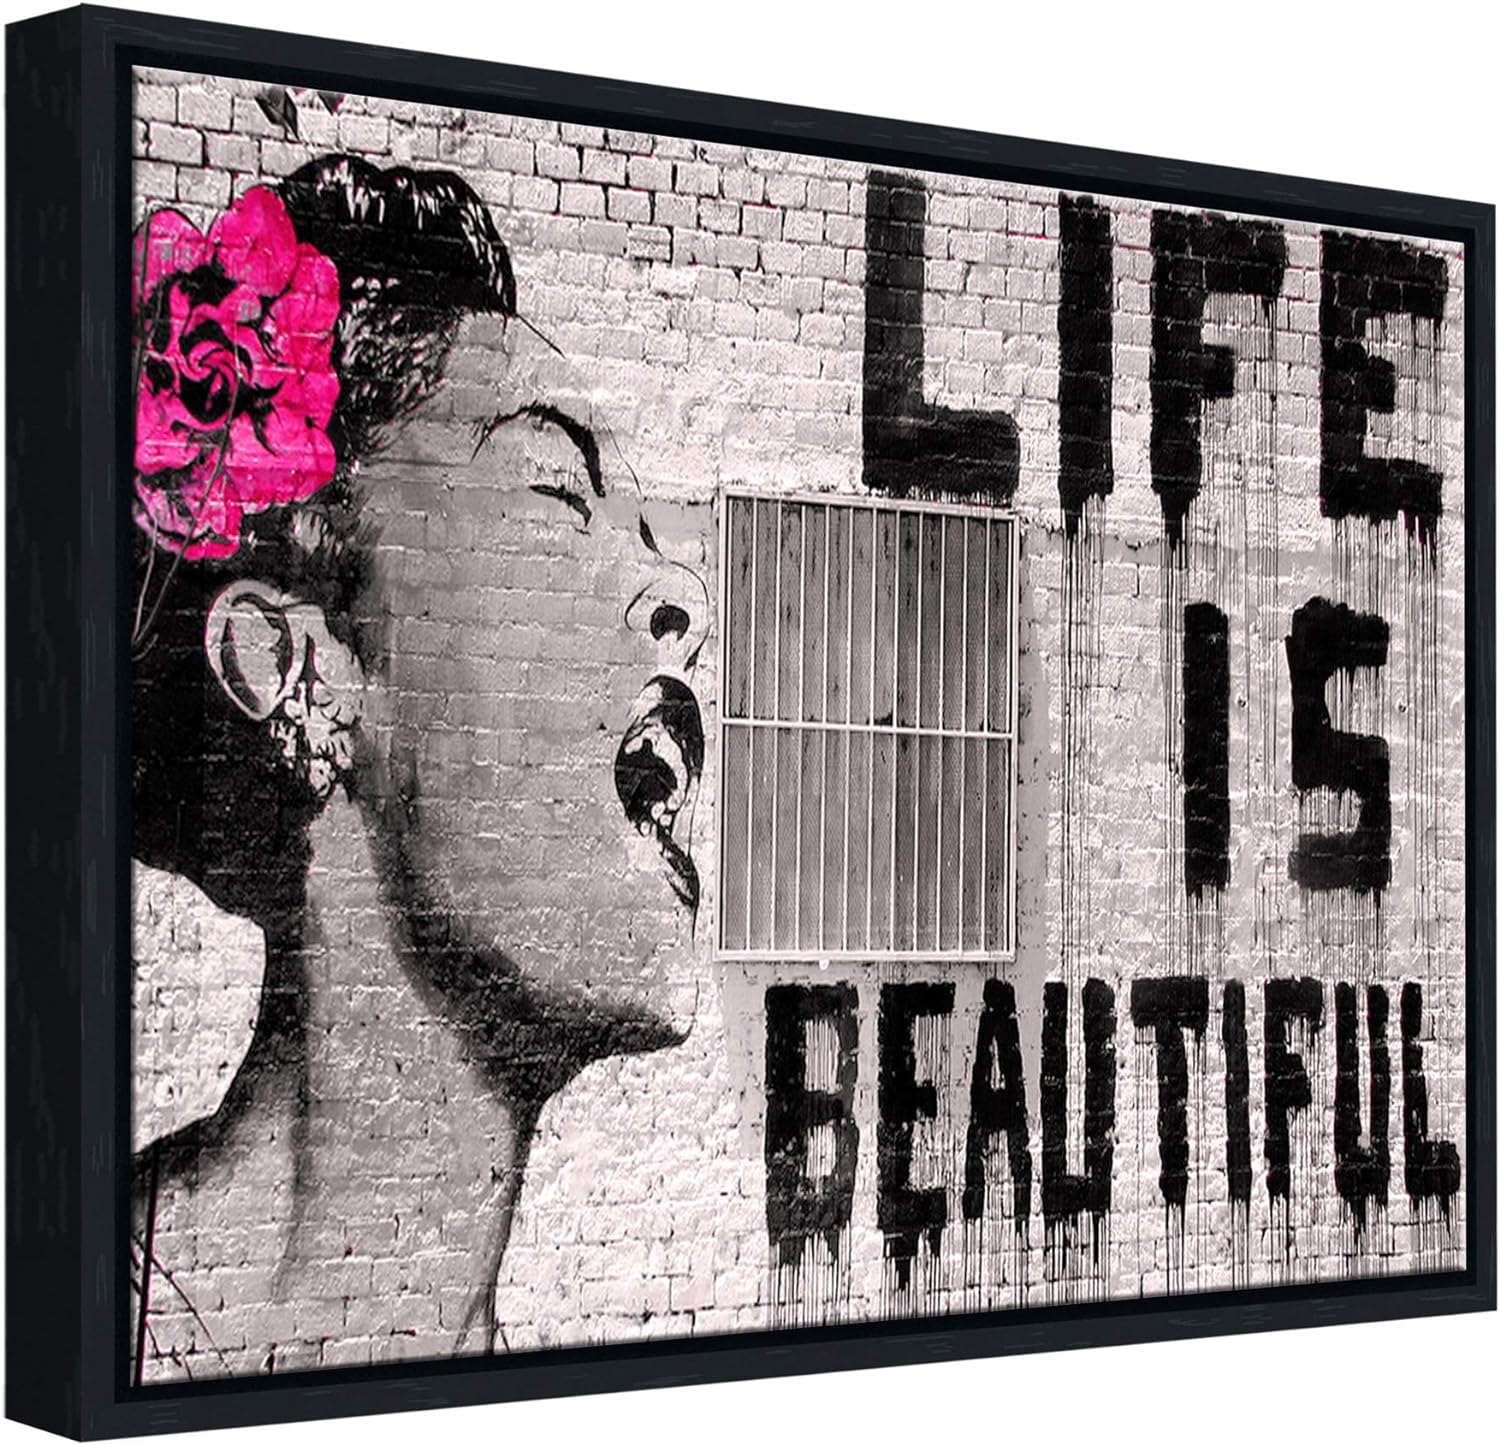 Wieco Art Framed Wall Art Canvas Prints of Banksy Life is Beautiful Abstract Artwork for Wall Decor Room Decorations Black Frame